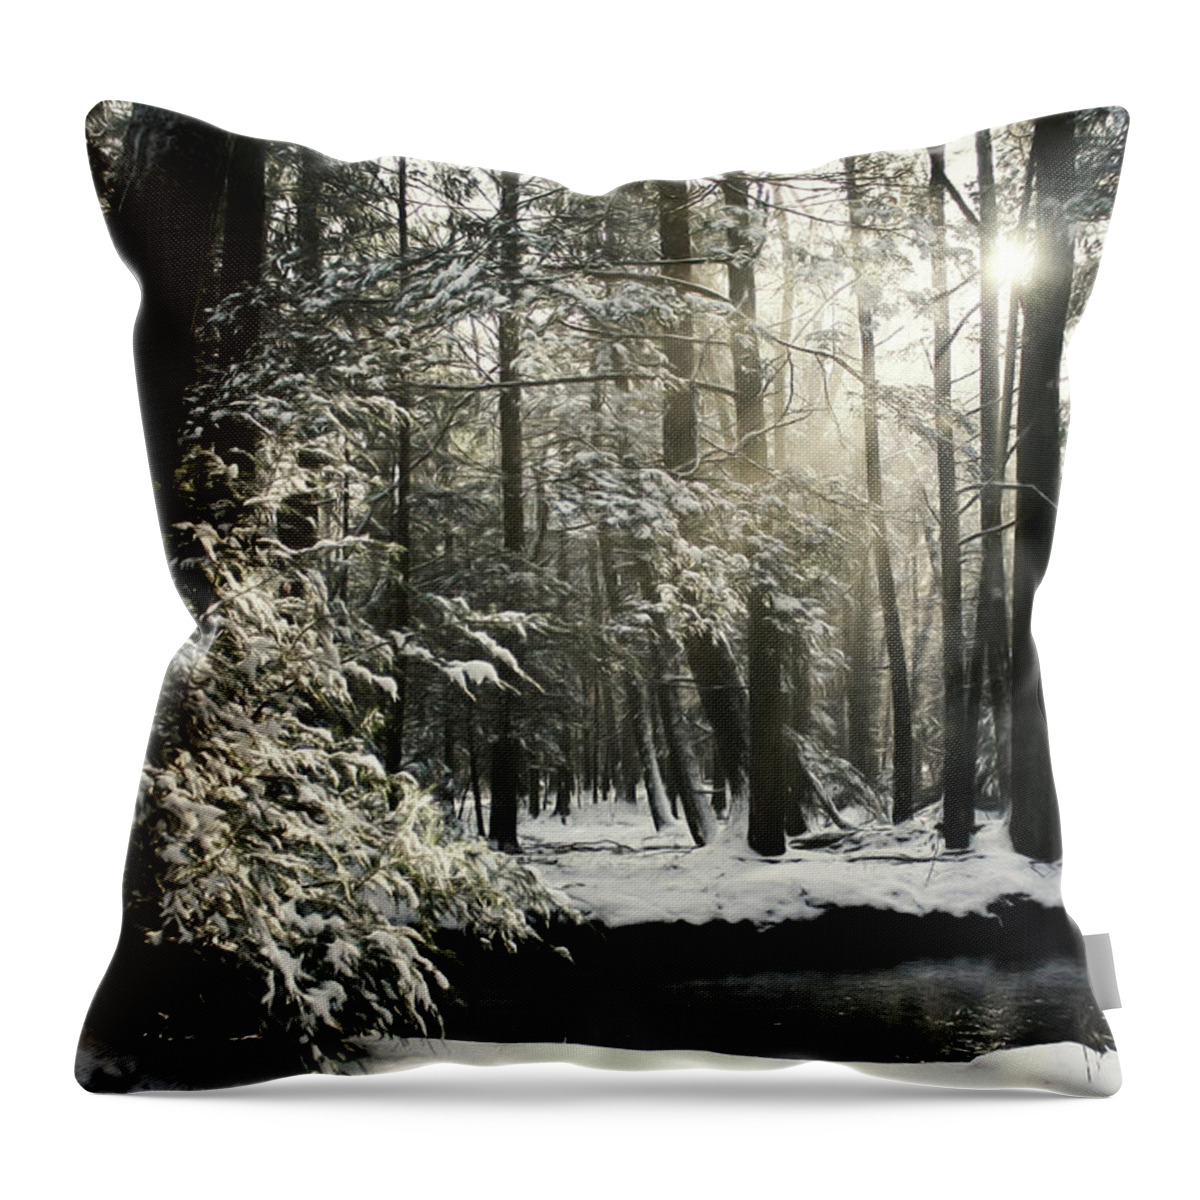 Snow Throw Pillow featuring the photograph New Years Snowfall by Lori Deiter